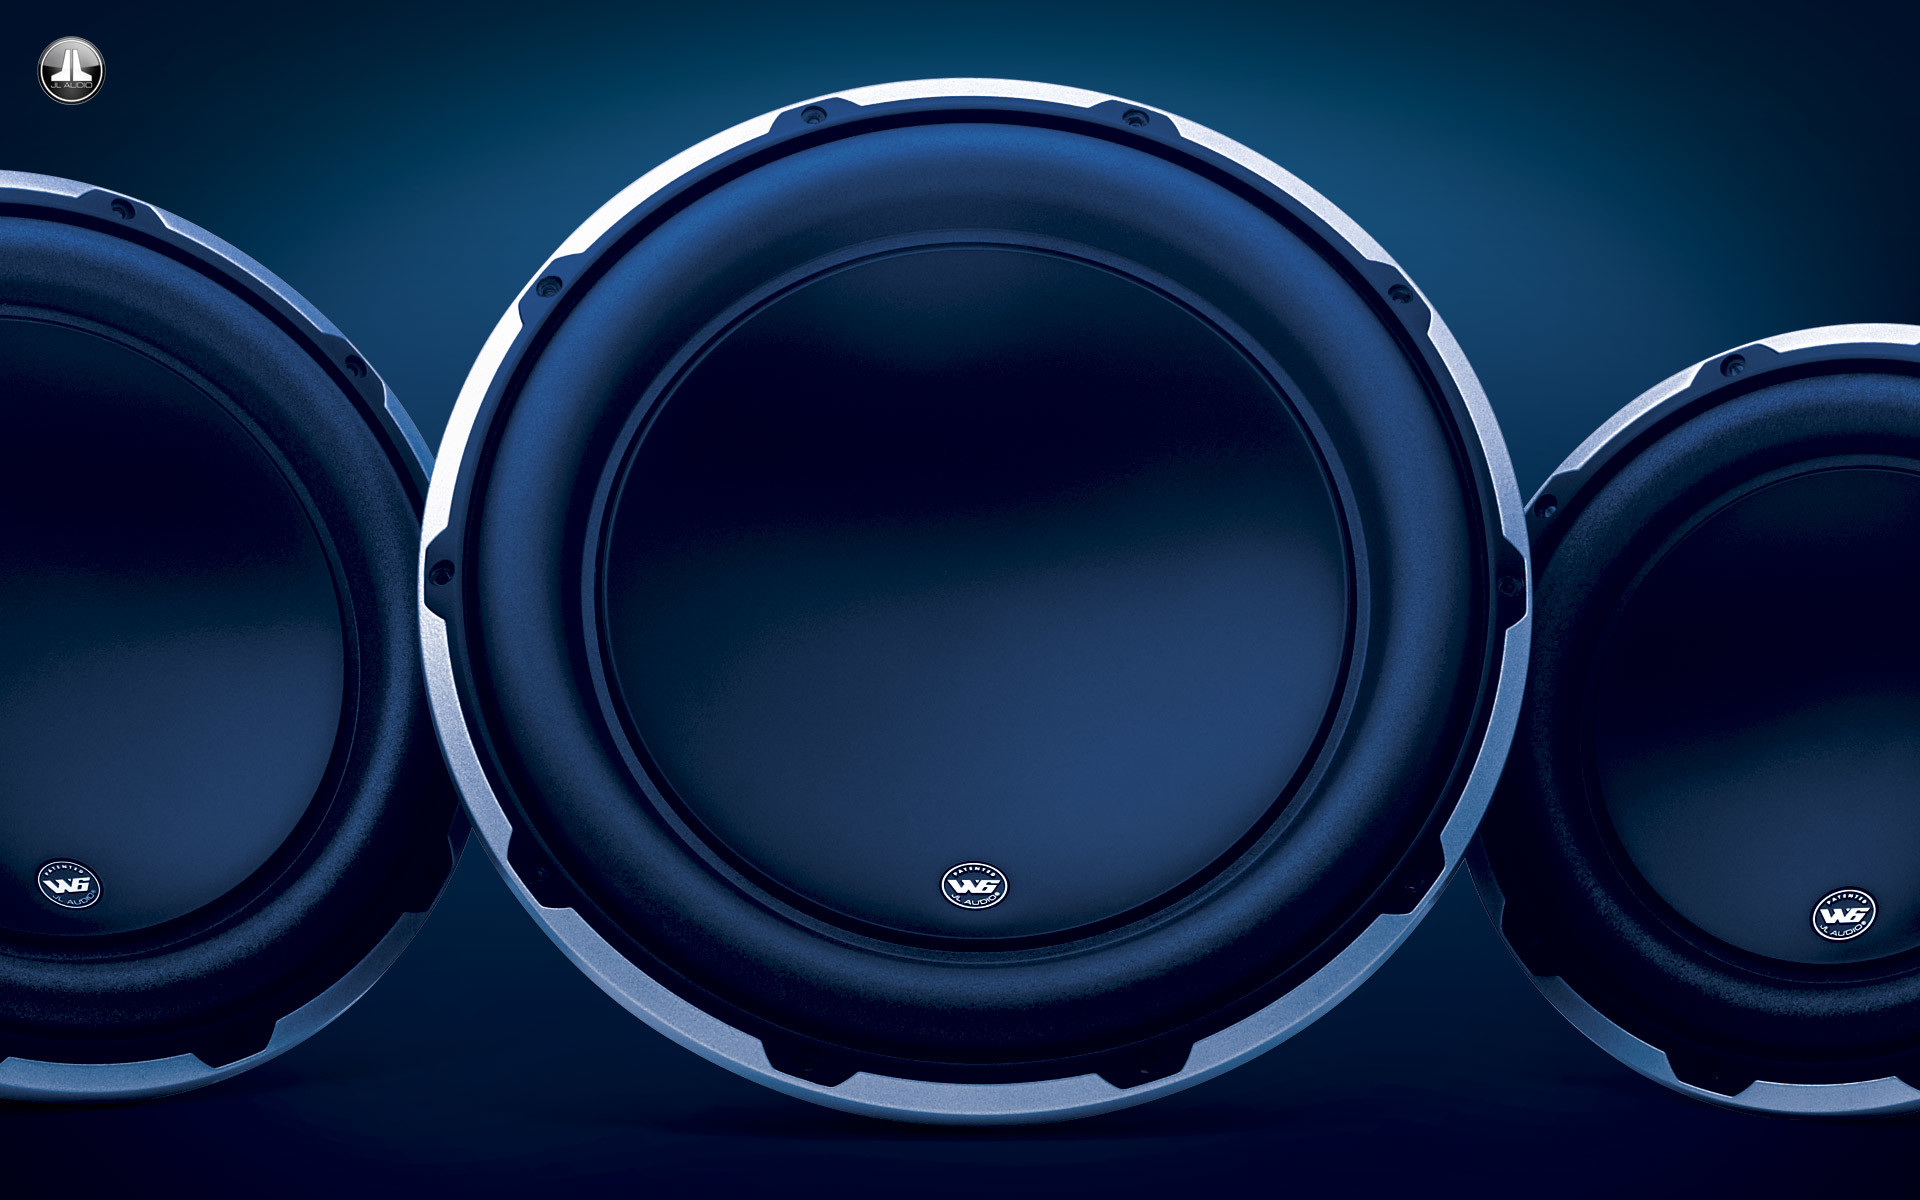 Wallpaper for Car Stereo (56+ images)